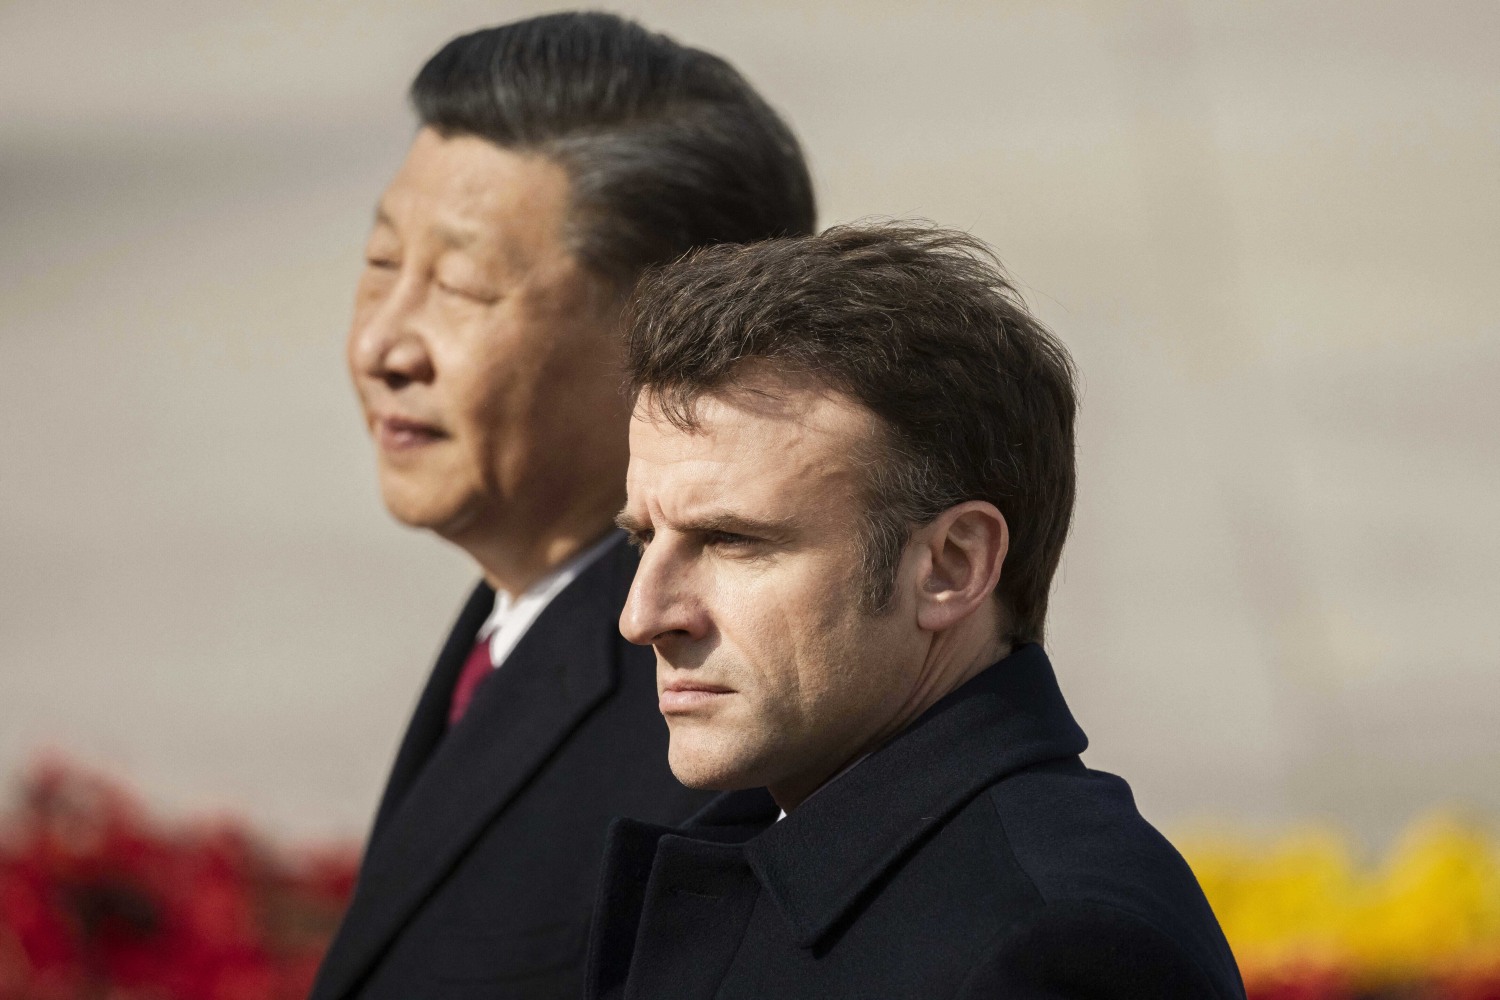 China celebrates Macron as U.S. and Europe fret over divisions